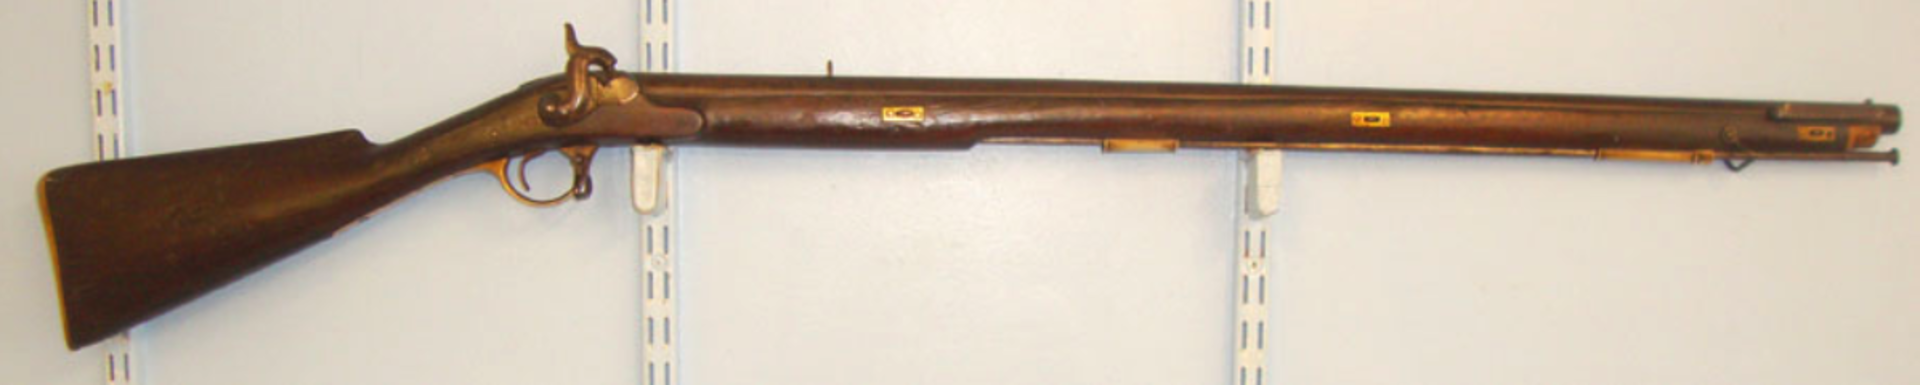 Victorian British Army In India .650 Bore Percussion Musket With Fitting For Brunswick Bayonet.